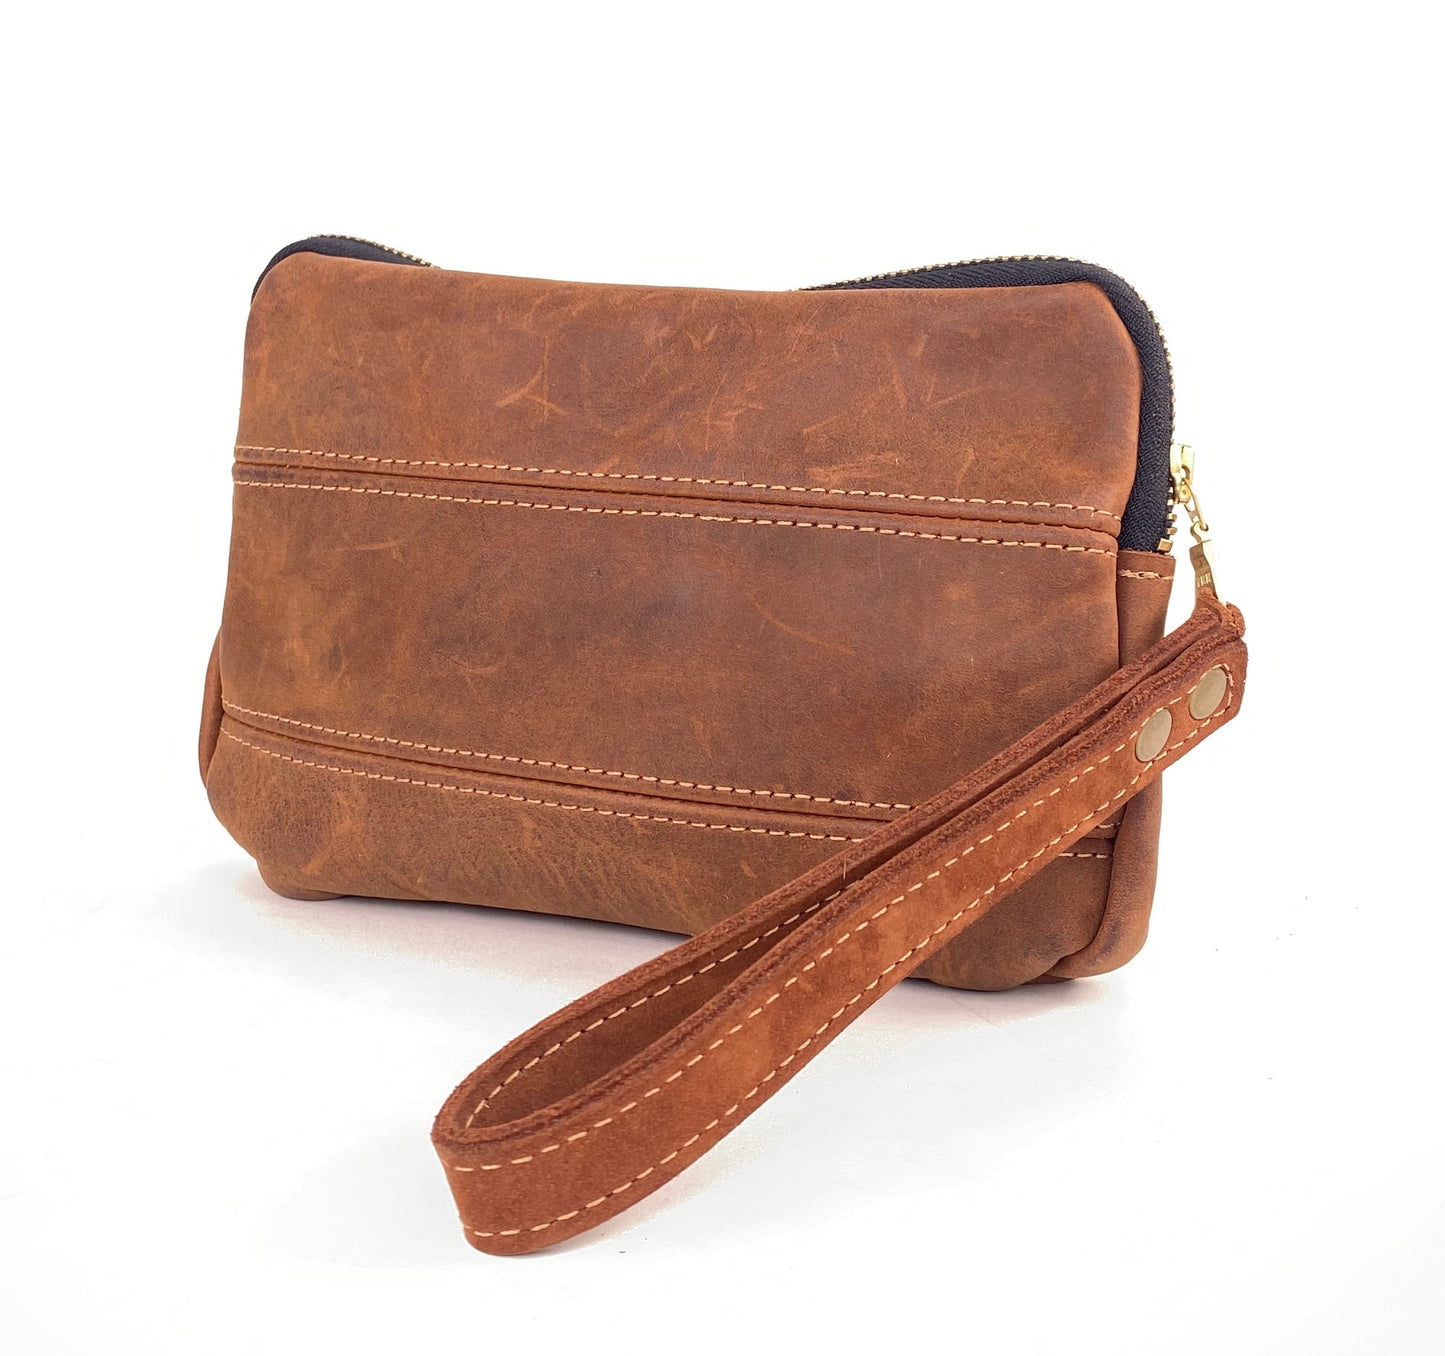 Leather Zip Pouch - in Suede Medium Brown